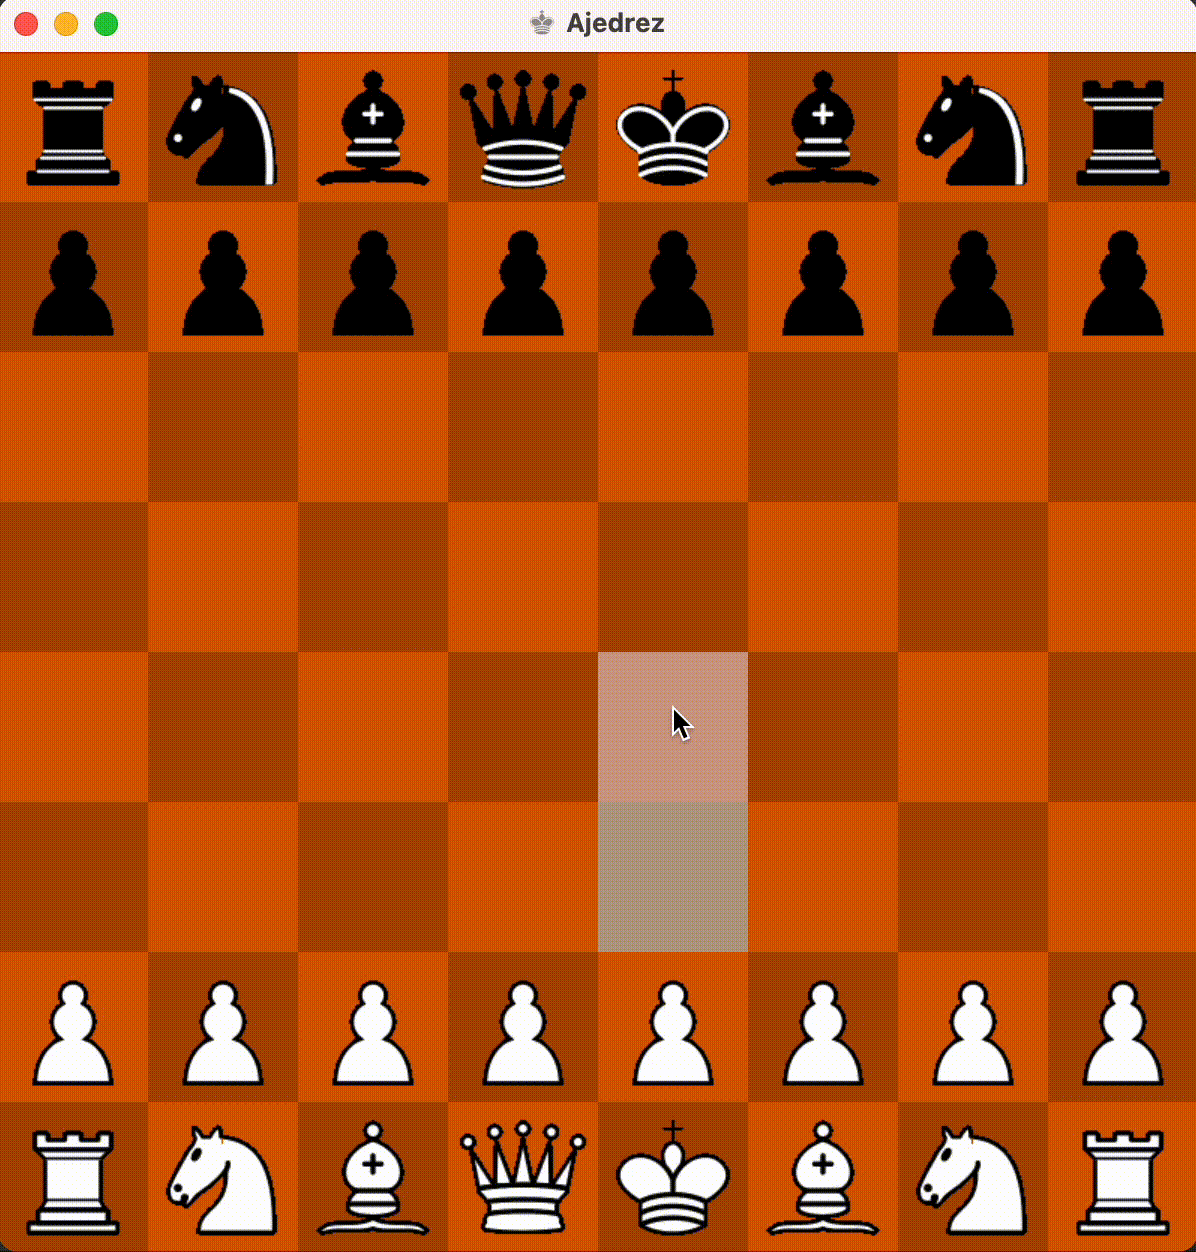 Gameplay of user playing as white against the computer